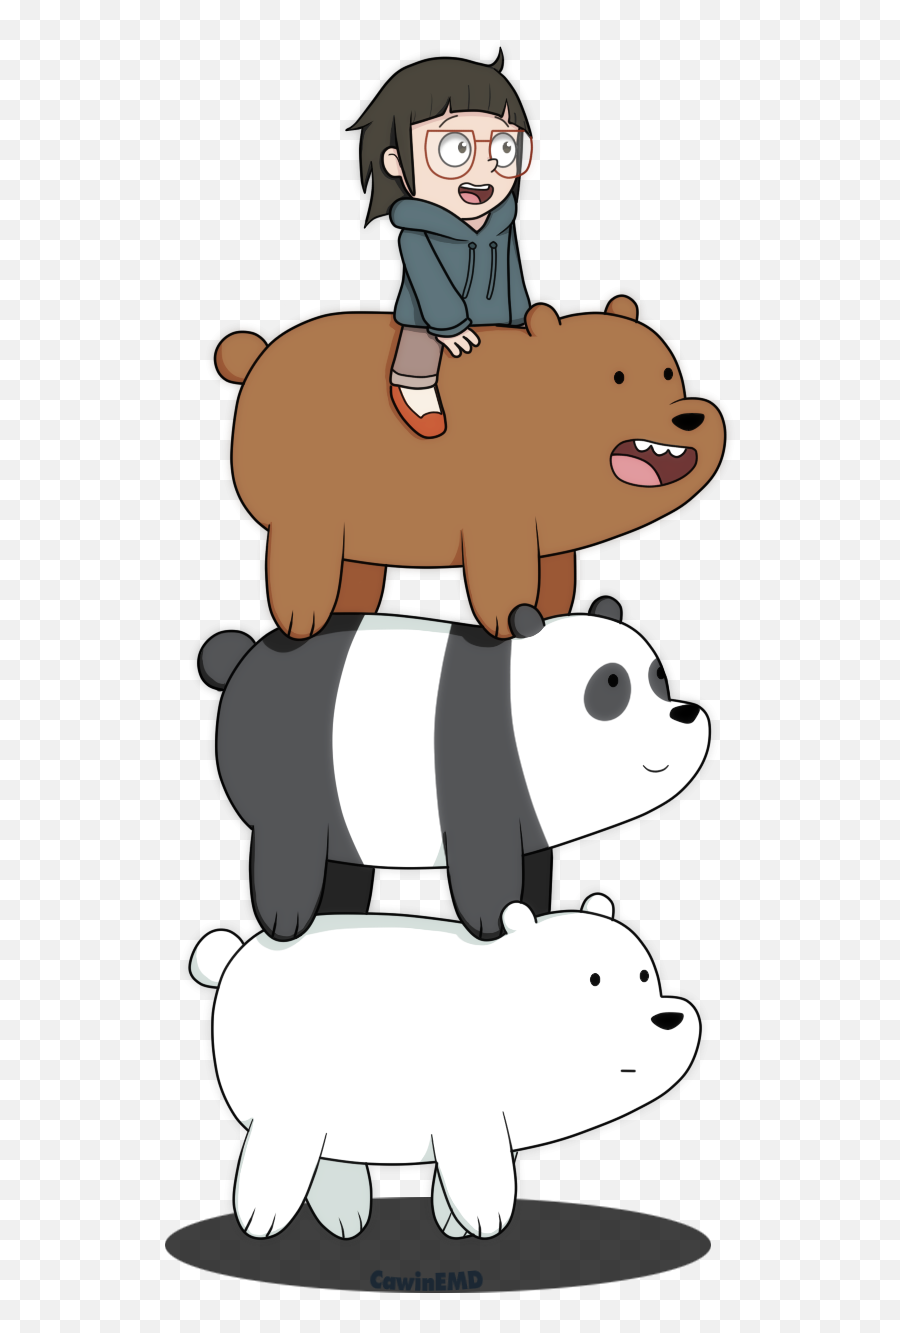 Watch This Show - We Bare Bears With Chloe Emoji,Ice Bear Showing Emotion